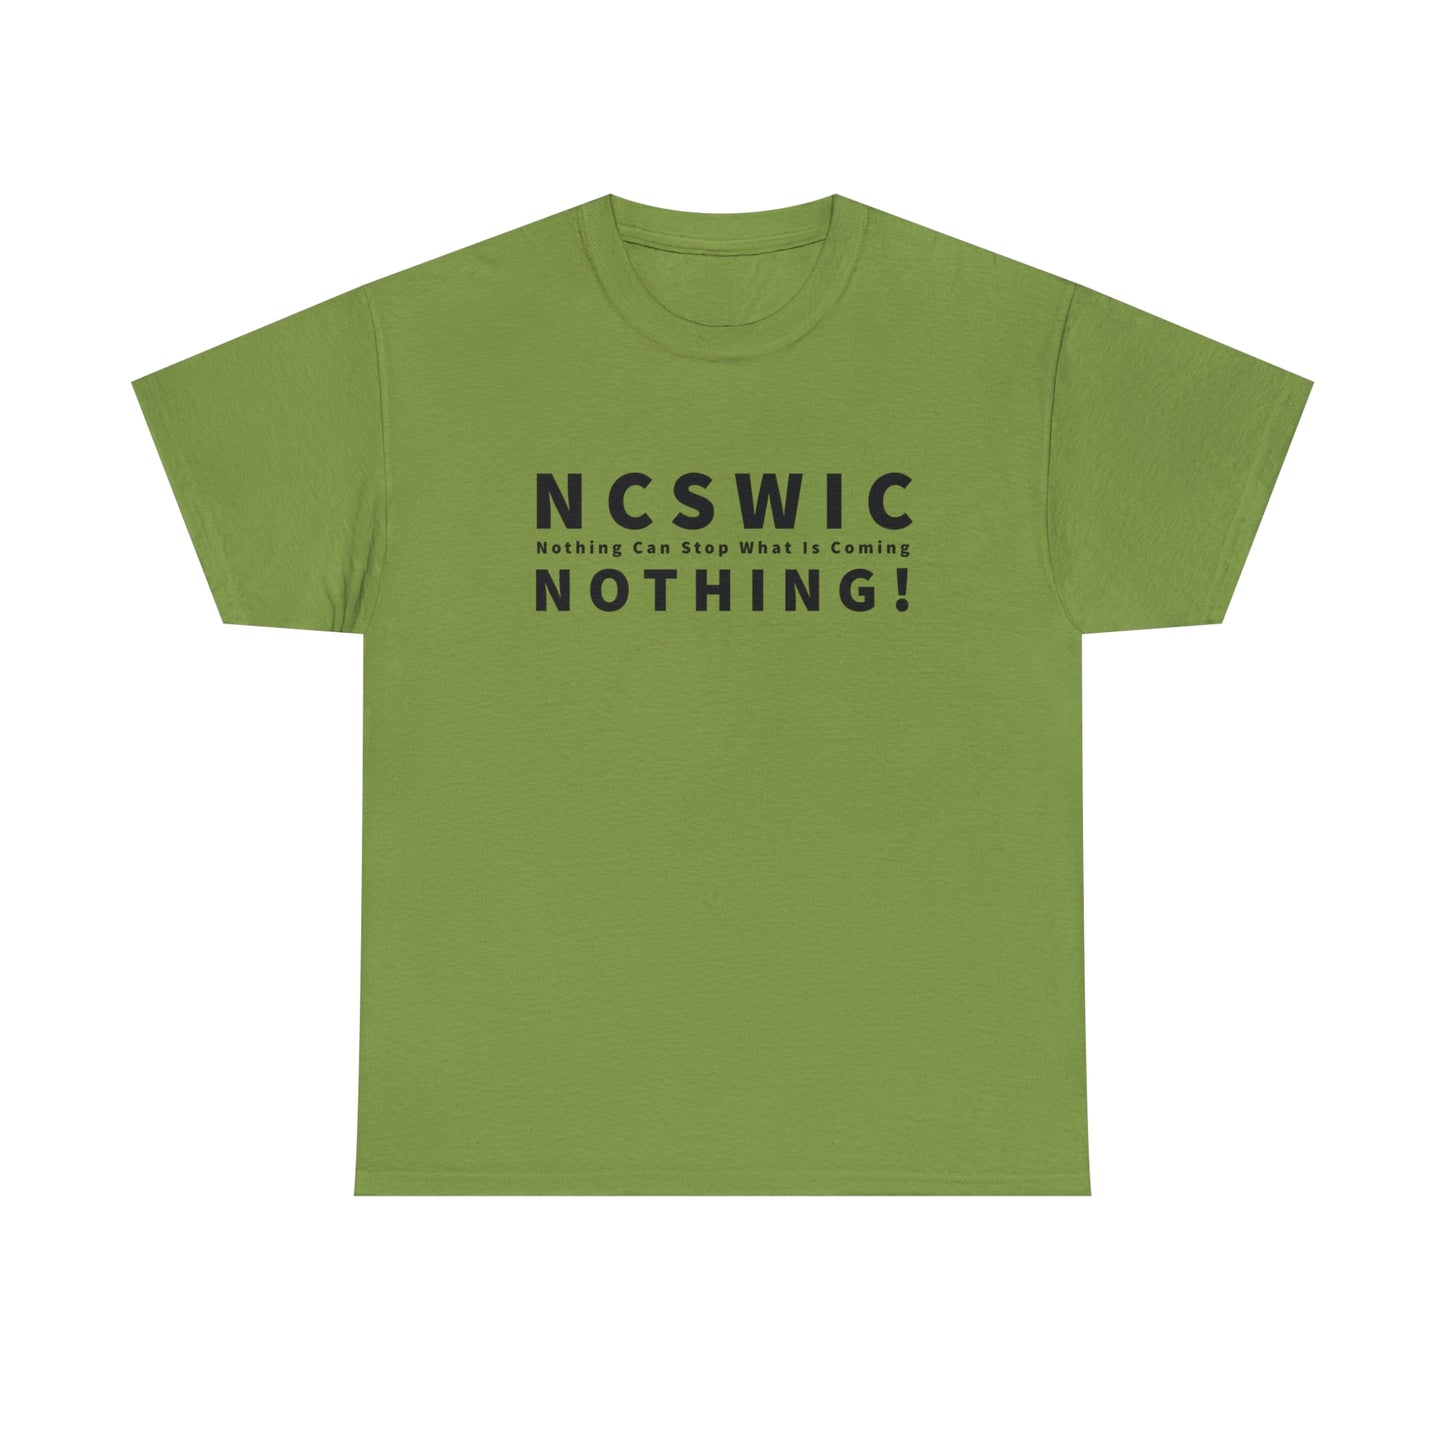 NCSWIC T-Shirt For Conspiracy T Shirt For Conservative Patriot Shirt Social Justice Awareness TShirt Nothing Can Stop What Is Coming TShirt